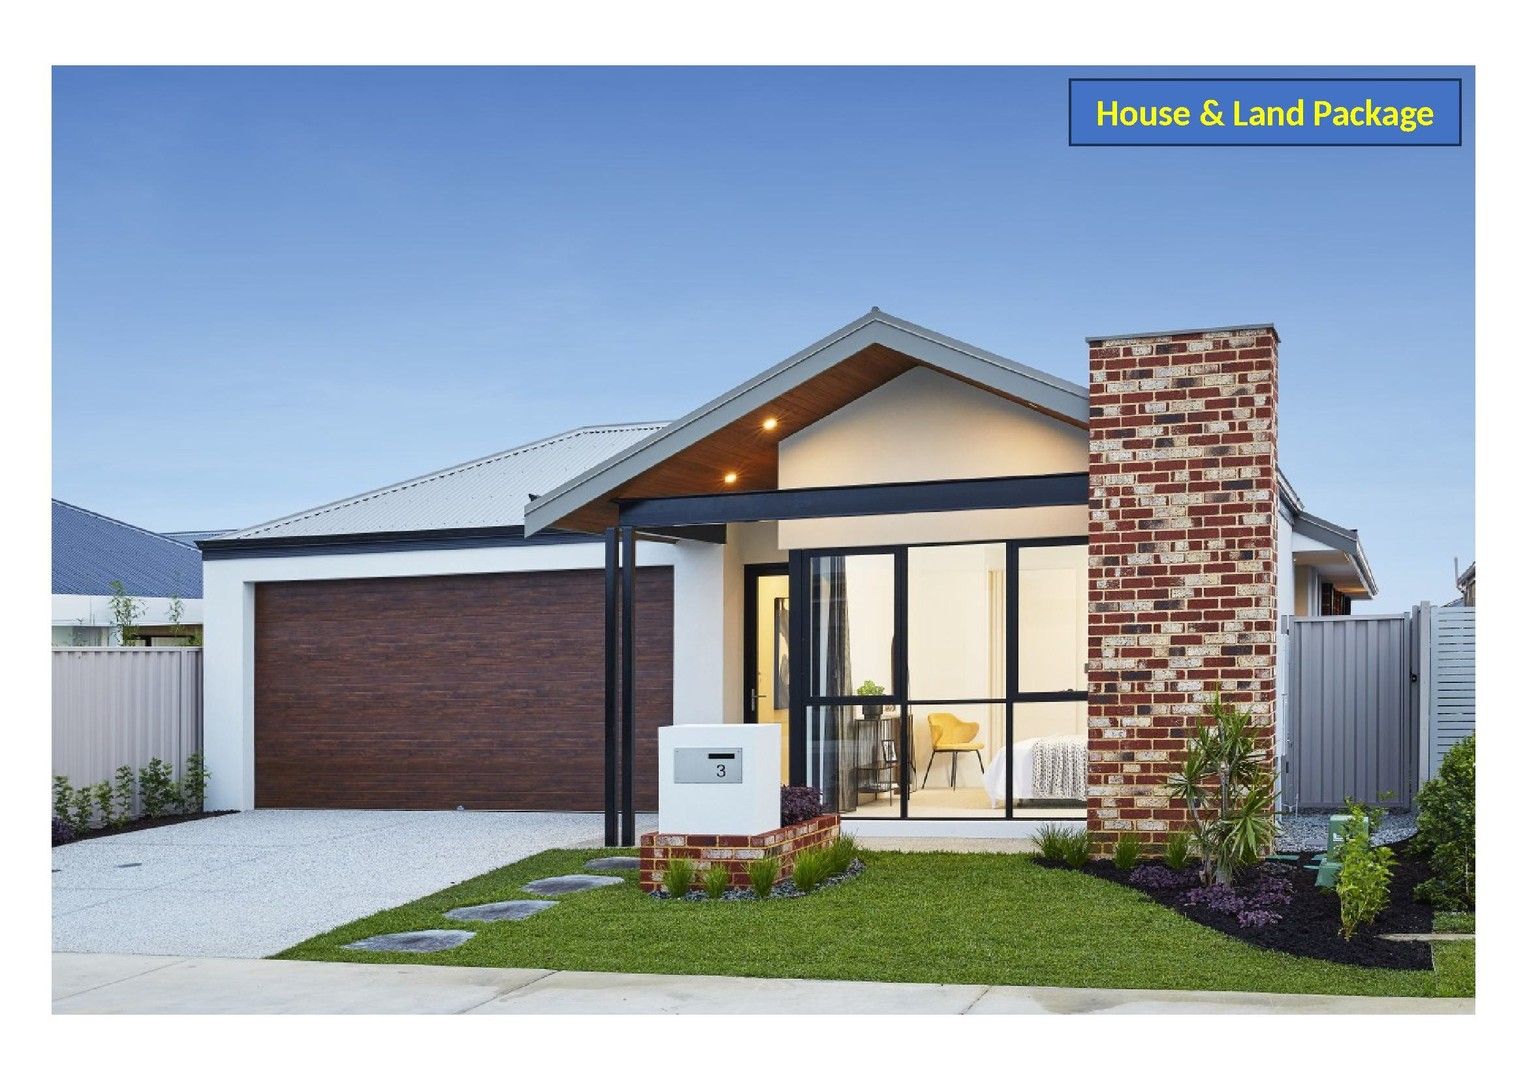 4 bedrooms New House & Land in Lot 21 Packer Rise HAMMOND PARK WA, 6164